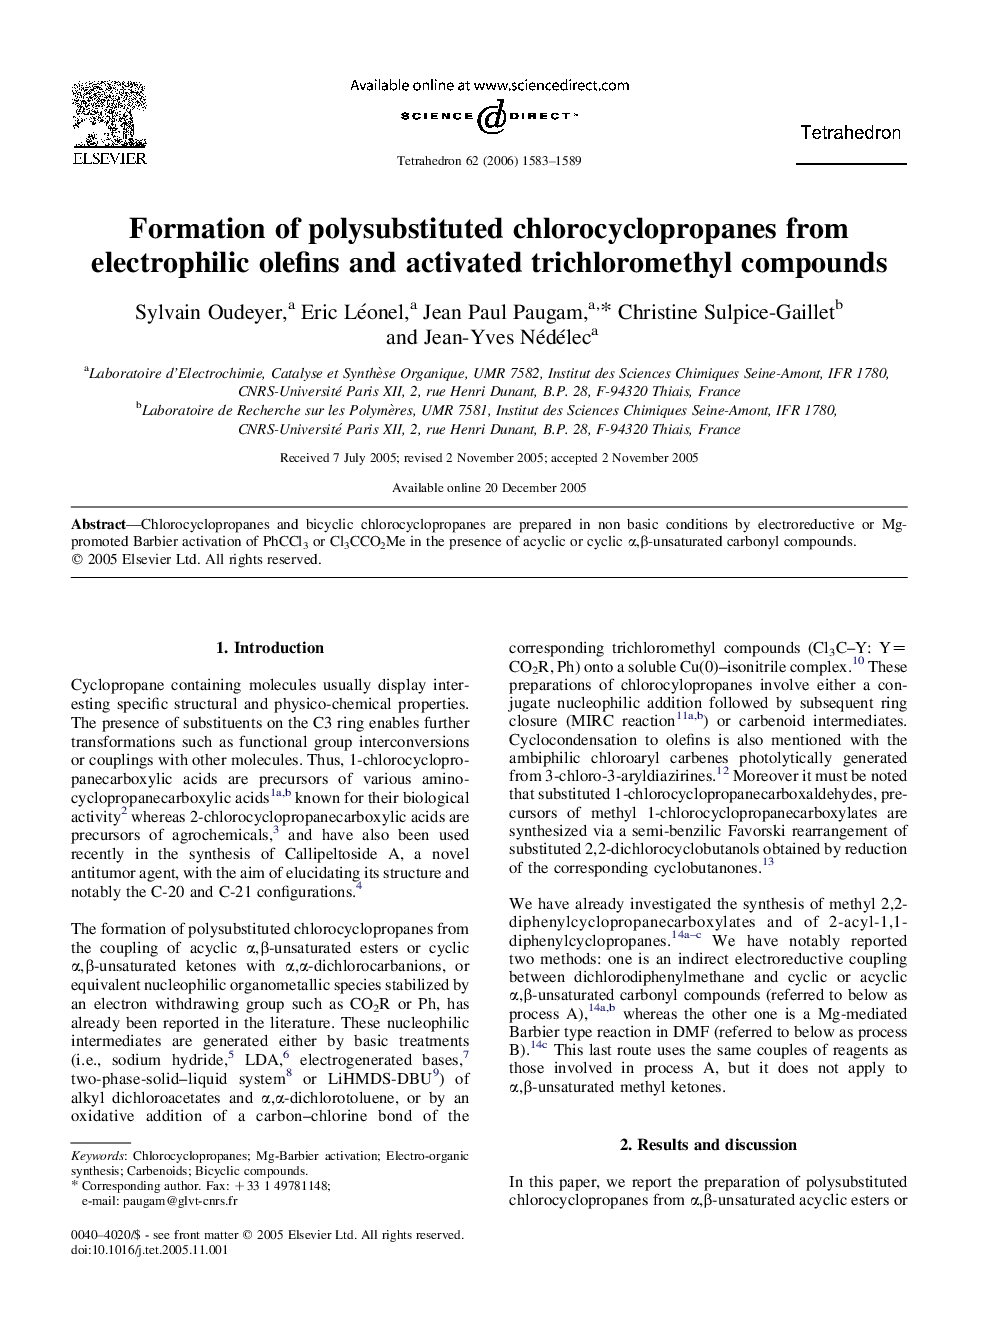 Formation of polysubstituted chlorocyclopropanes from electrophilic olefins and activated trichloromethyl compounds